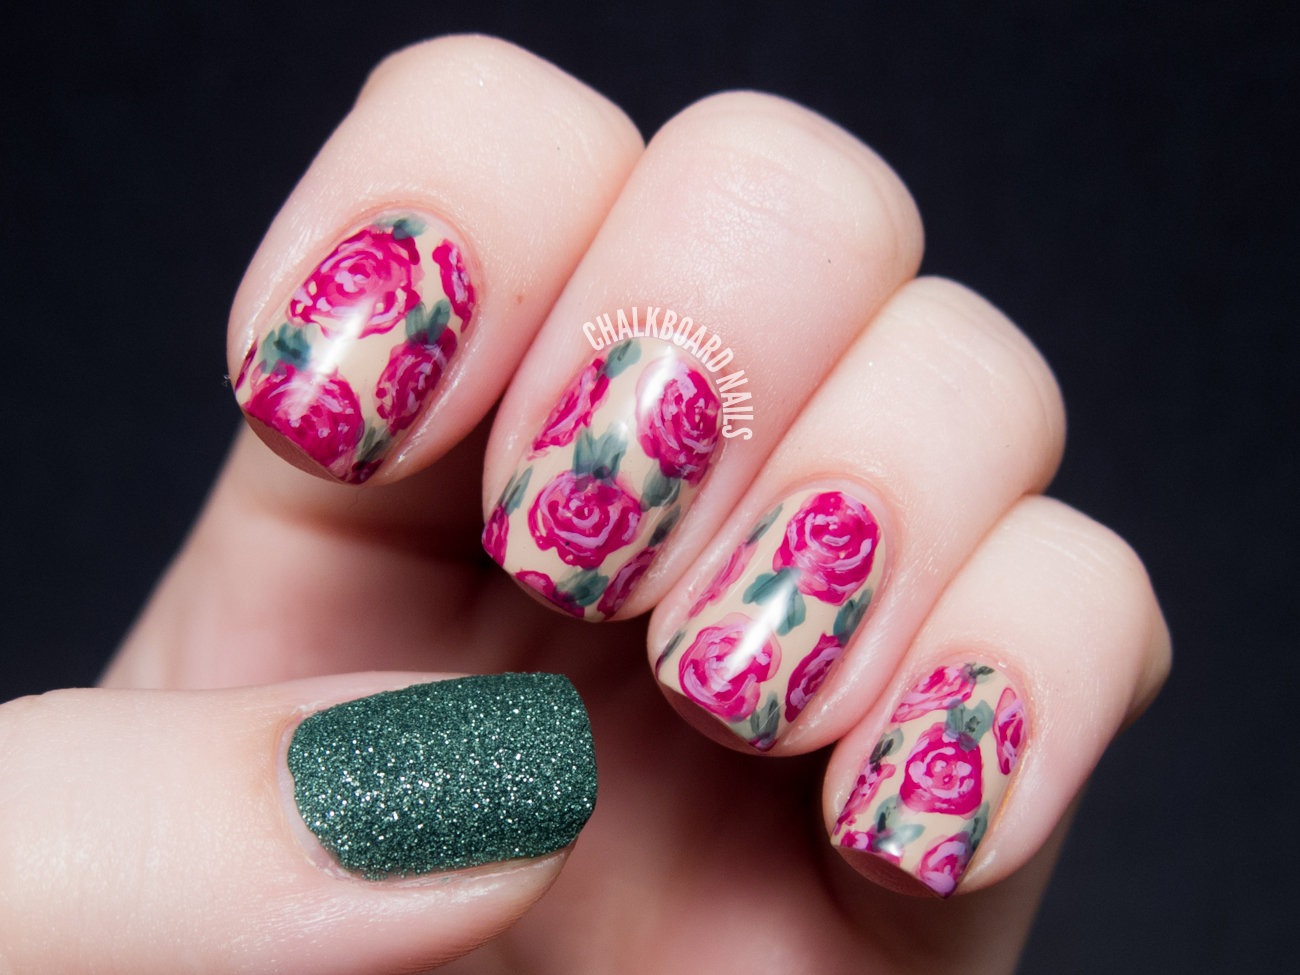 3. How to Create a Rose Nail Art Design - wide 6